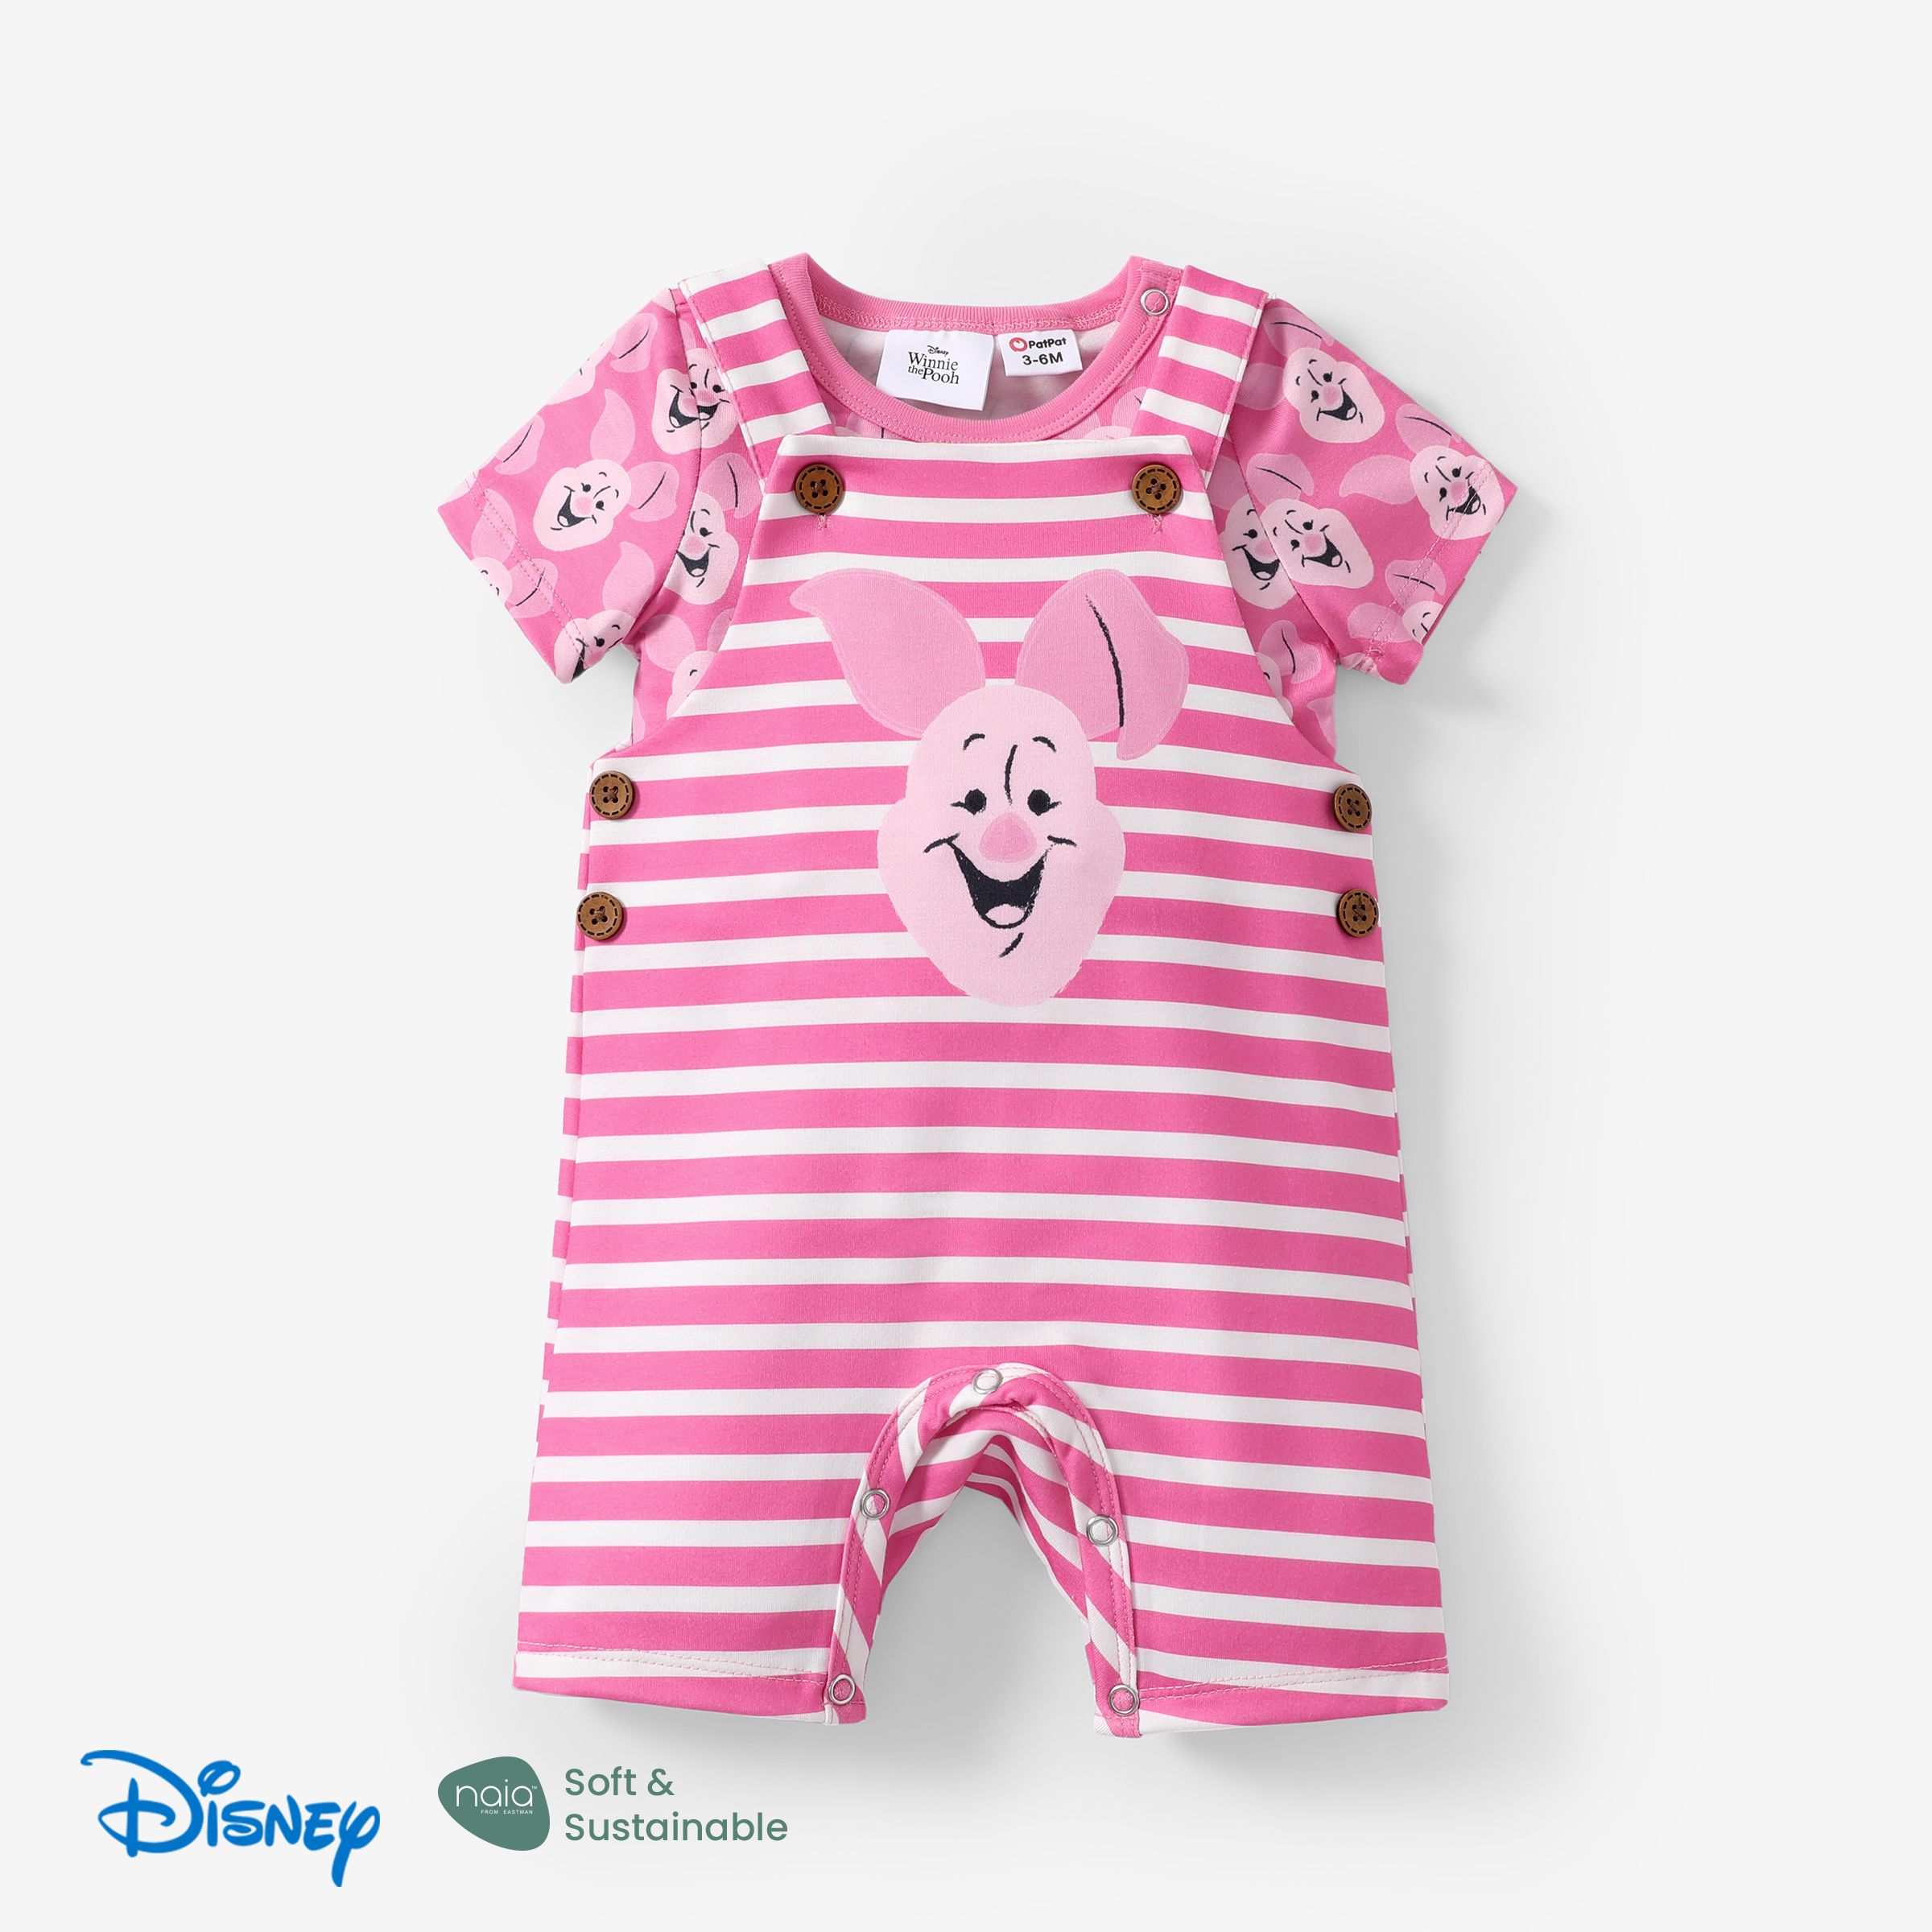 

Disney Winnie the Pooh Baby Boys/Girls 2pcs Naia™ Character All-over Print Tee with Striped Overall Set